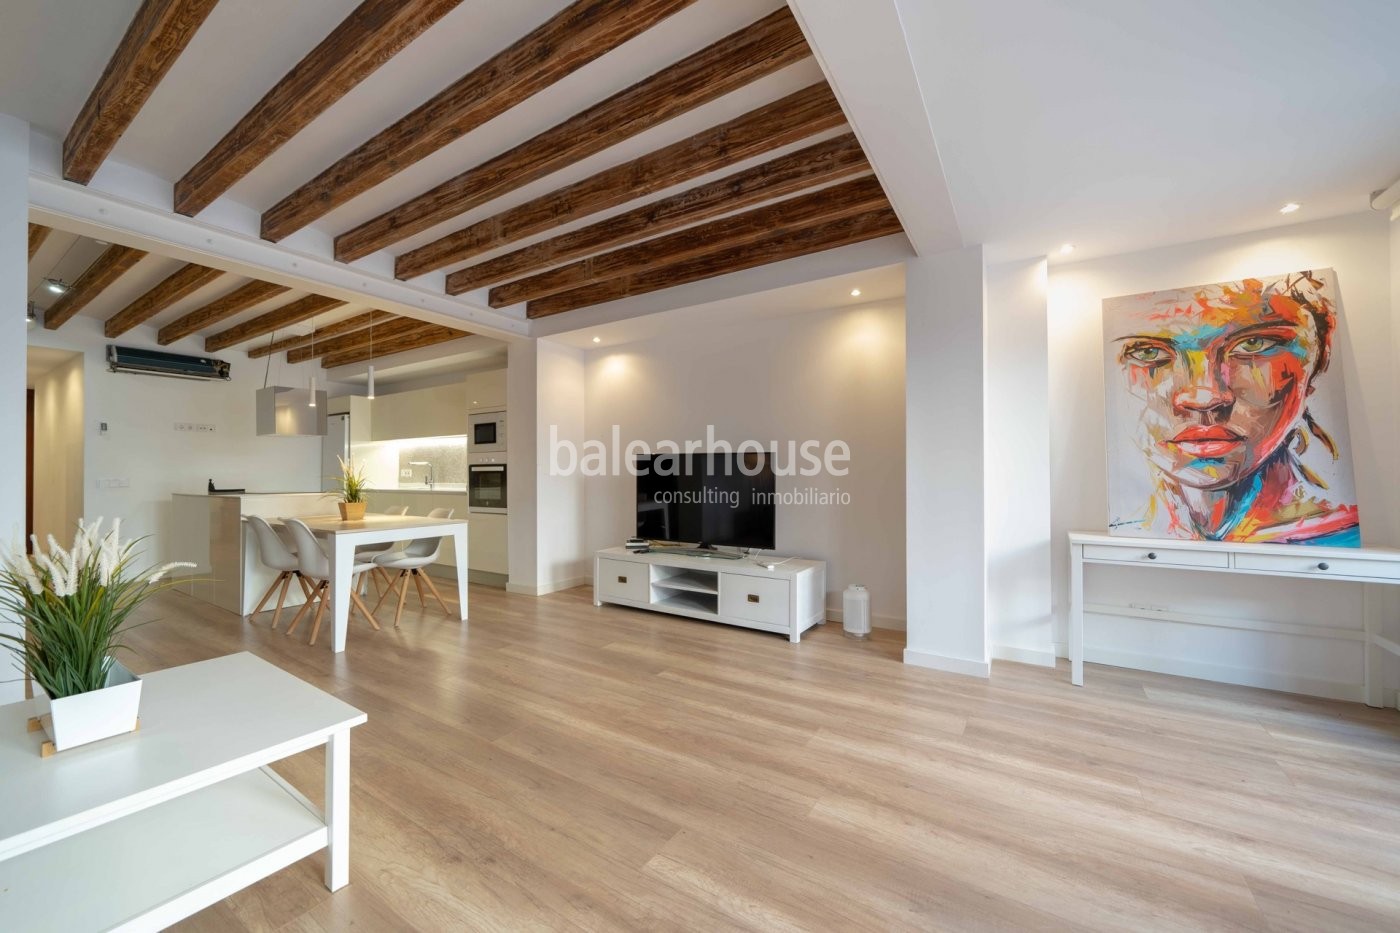 Beautiful ground floor apartment with large terrace in Palma's sought-after Santa Catalina district